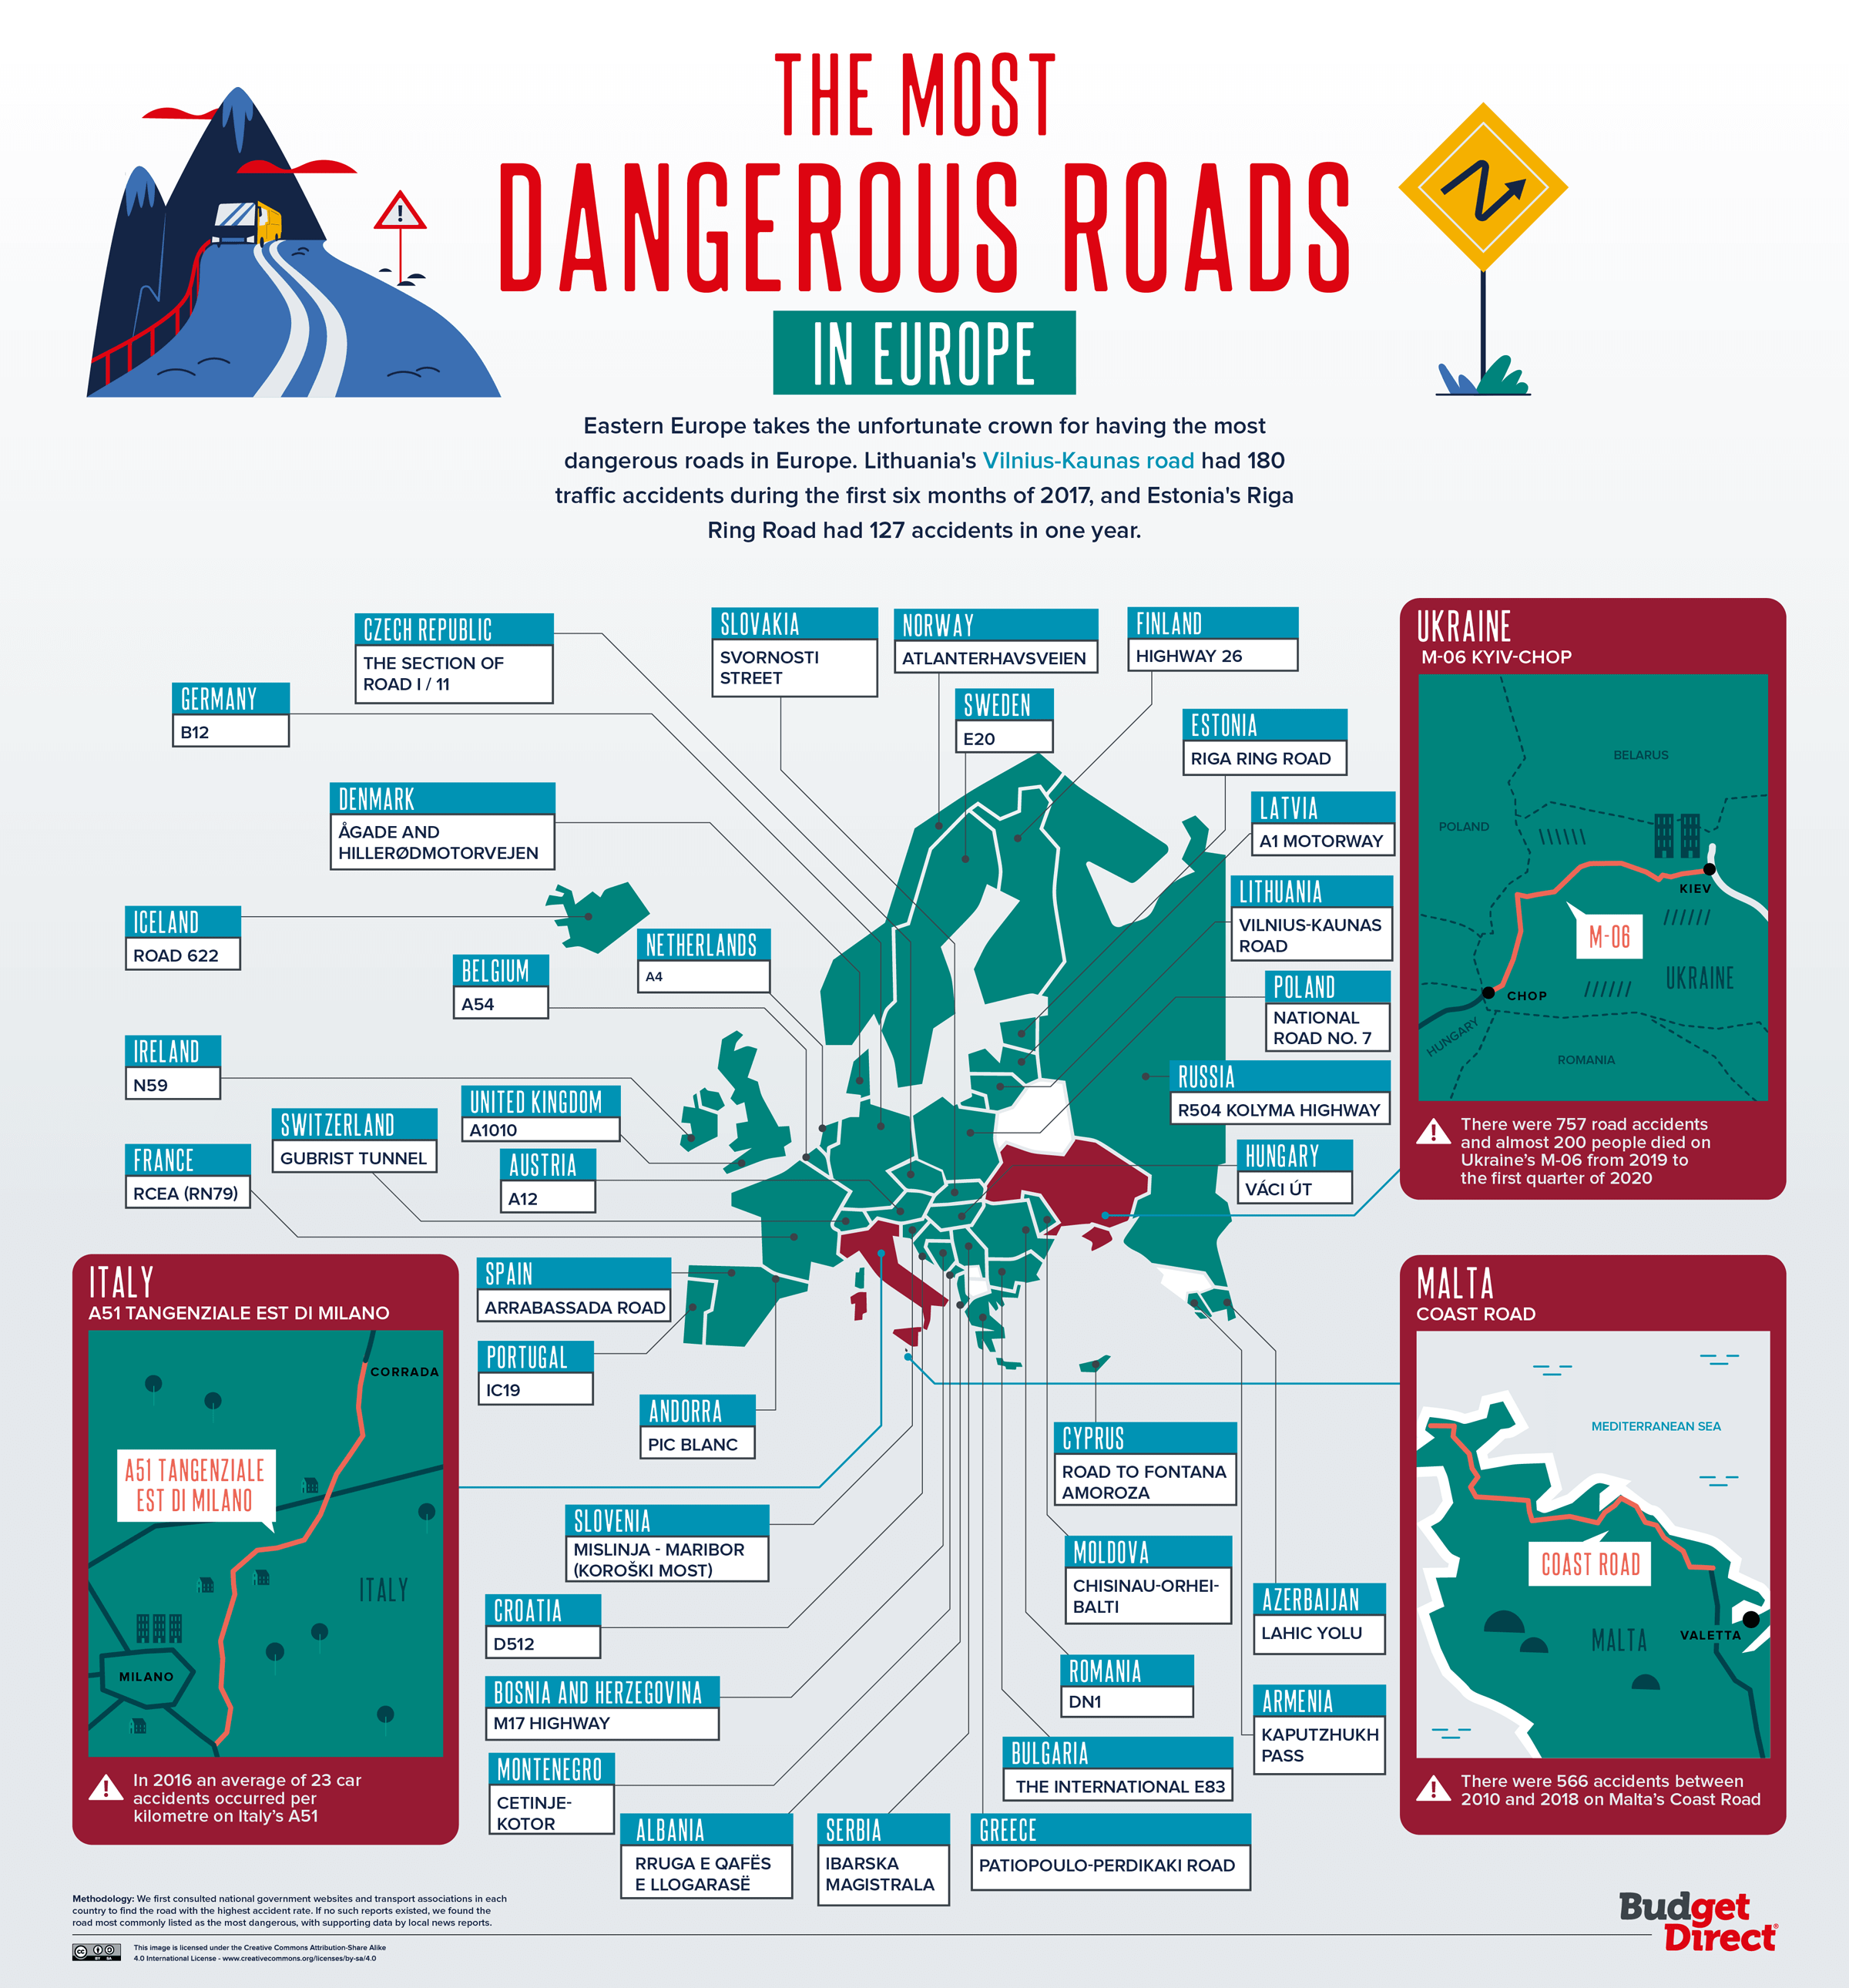 The most dangerous roads in Europe